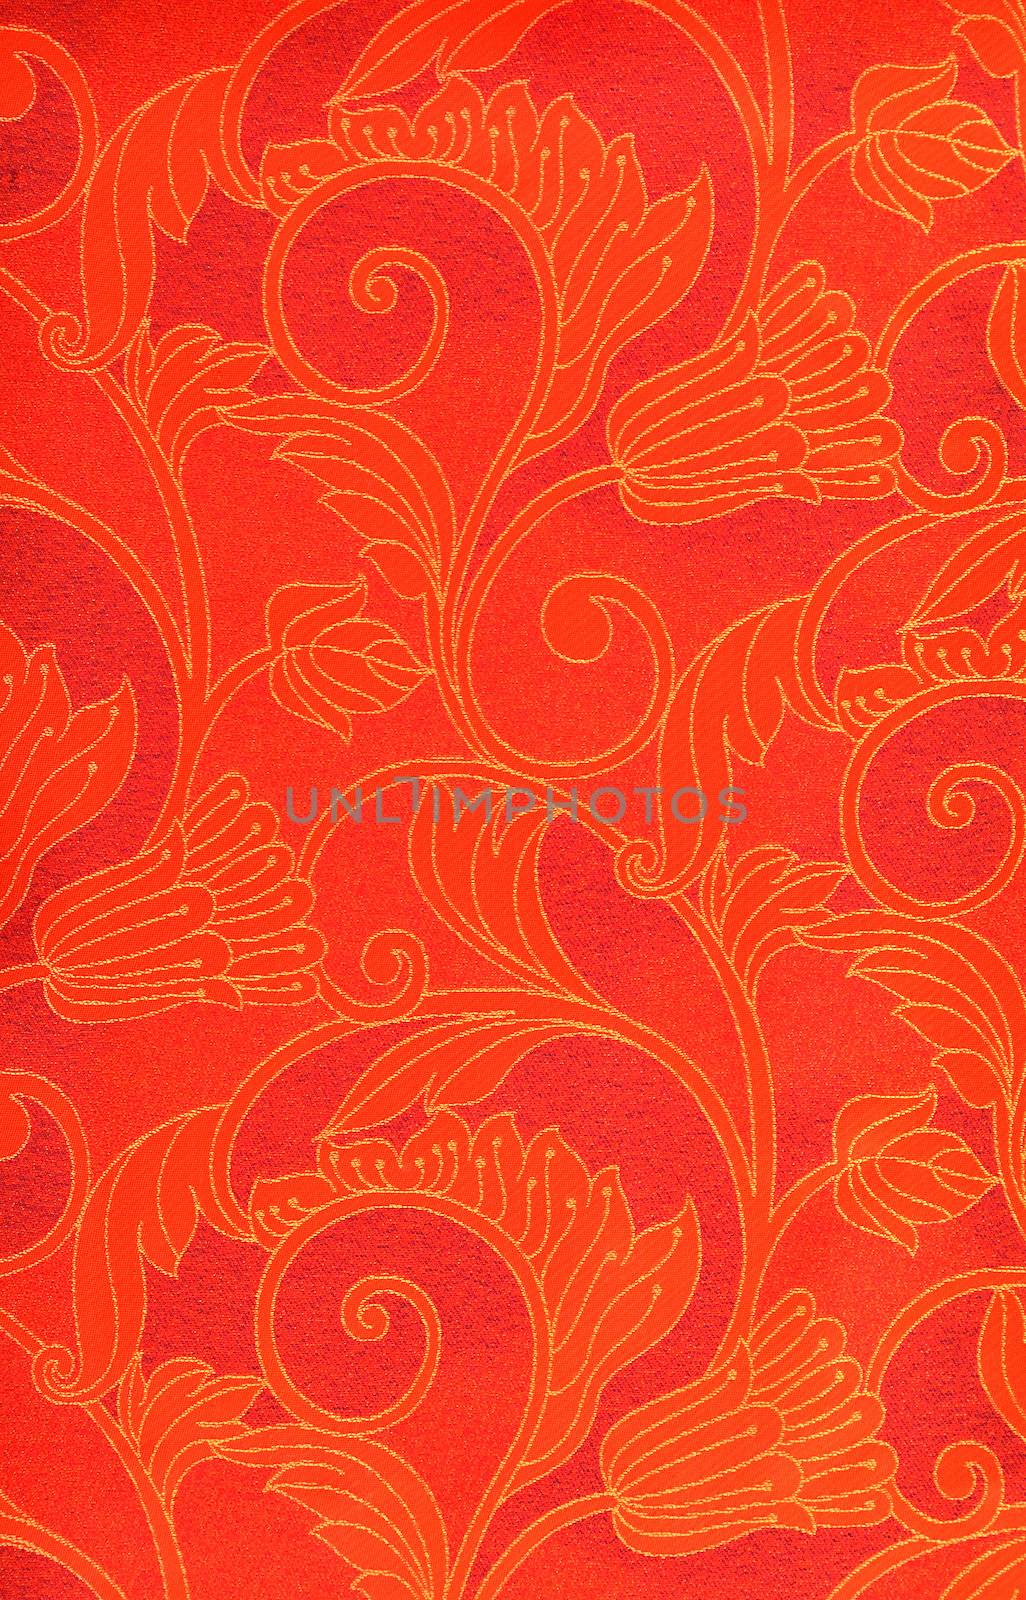 red abstract pattern on linen fabric